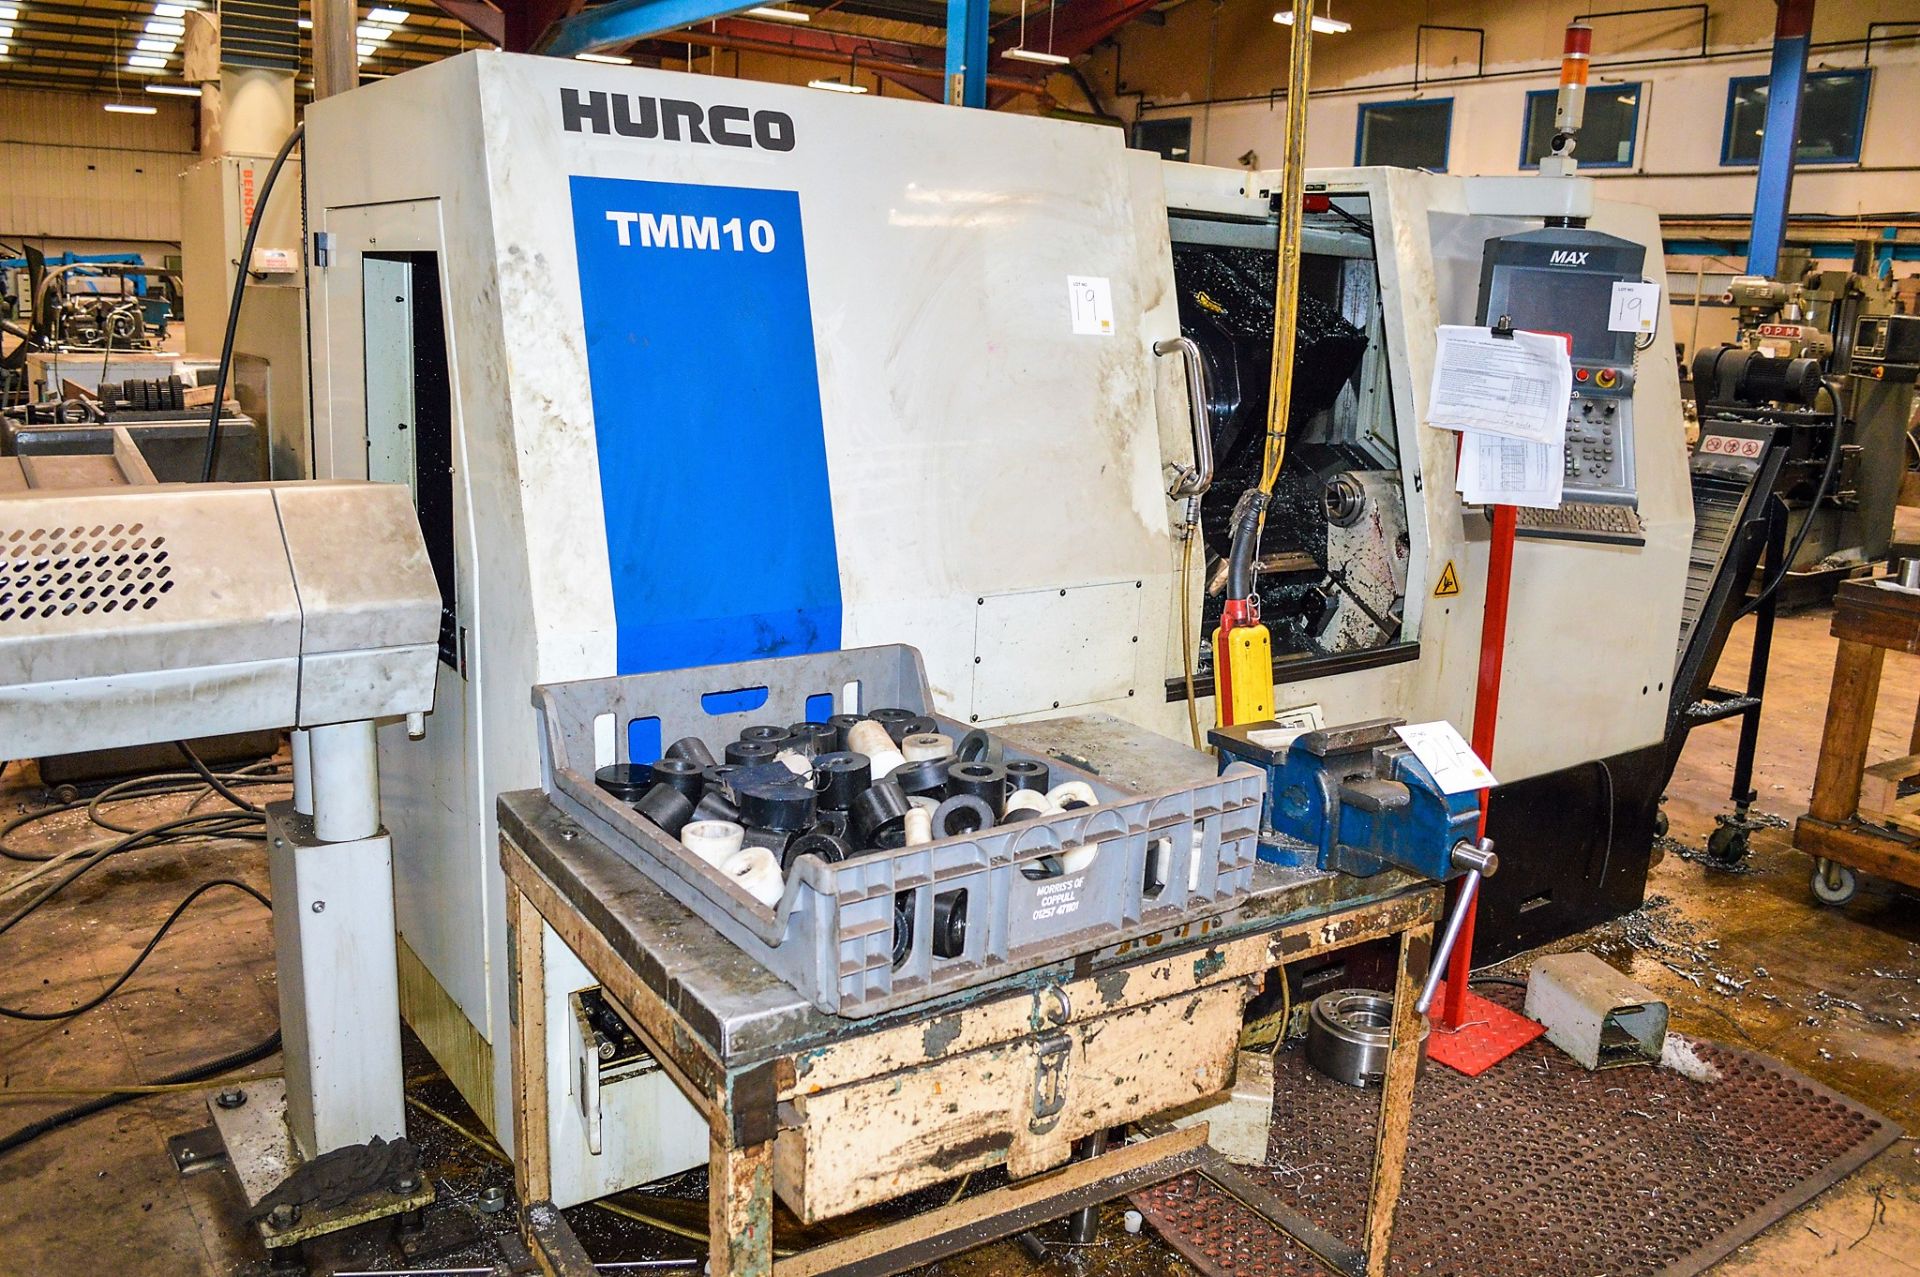 Hurco TMM10 CNC slant bed lathe S/N: 11102100AAB c/w 12 station tool charge, headstock, Hurlo Max - Image 2 of 6